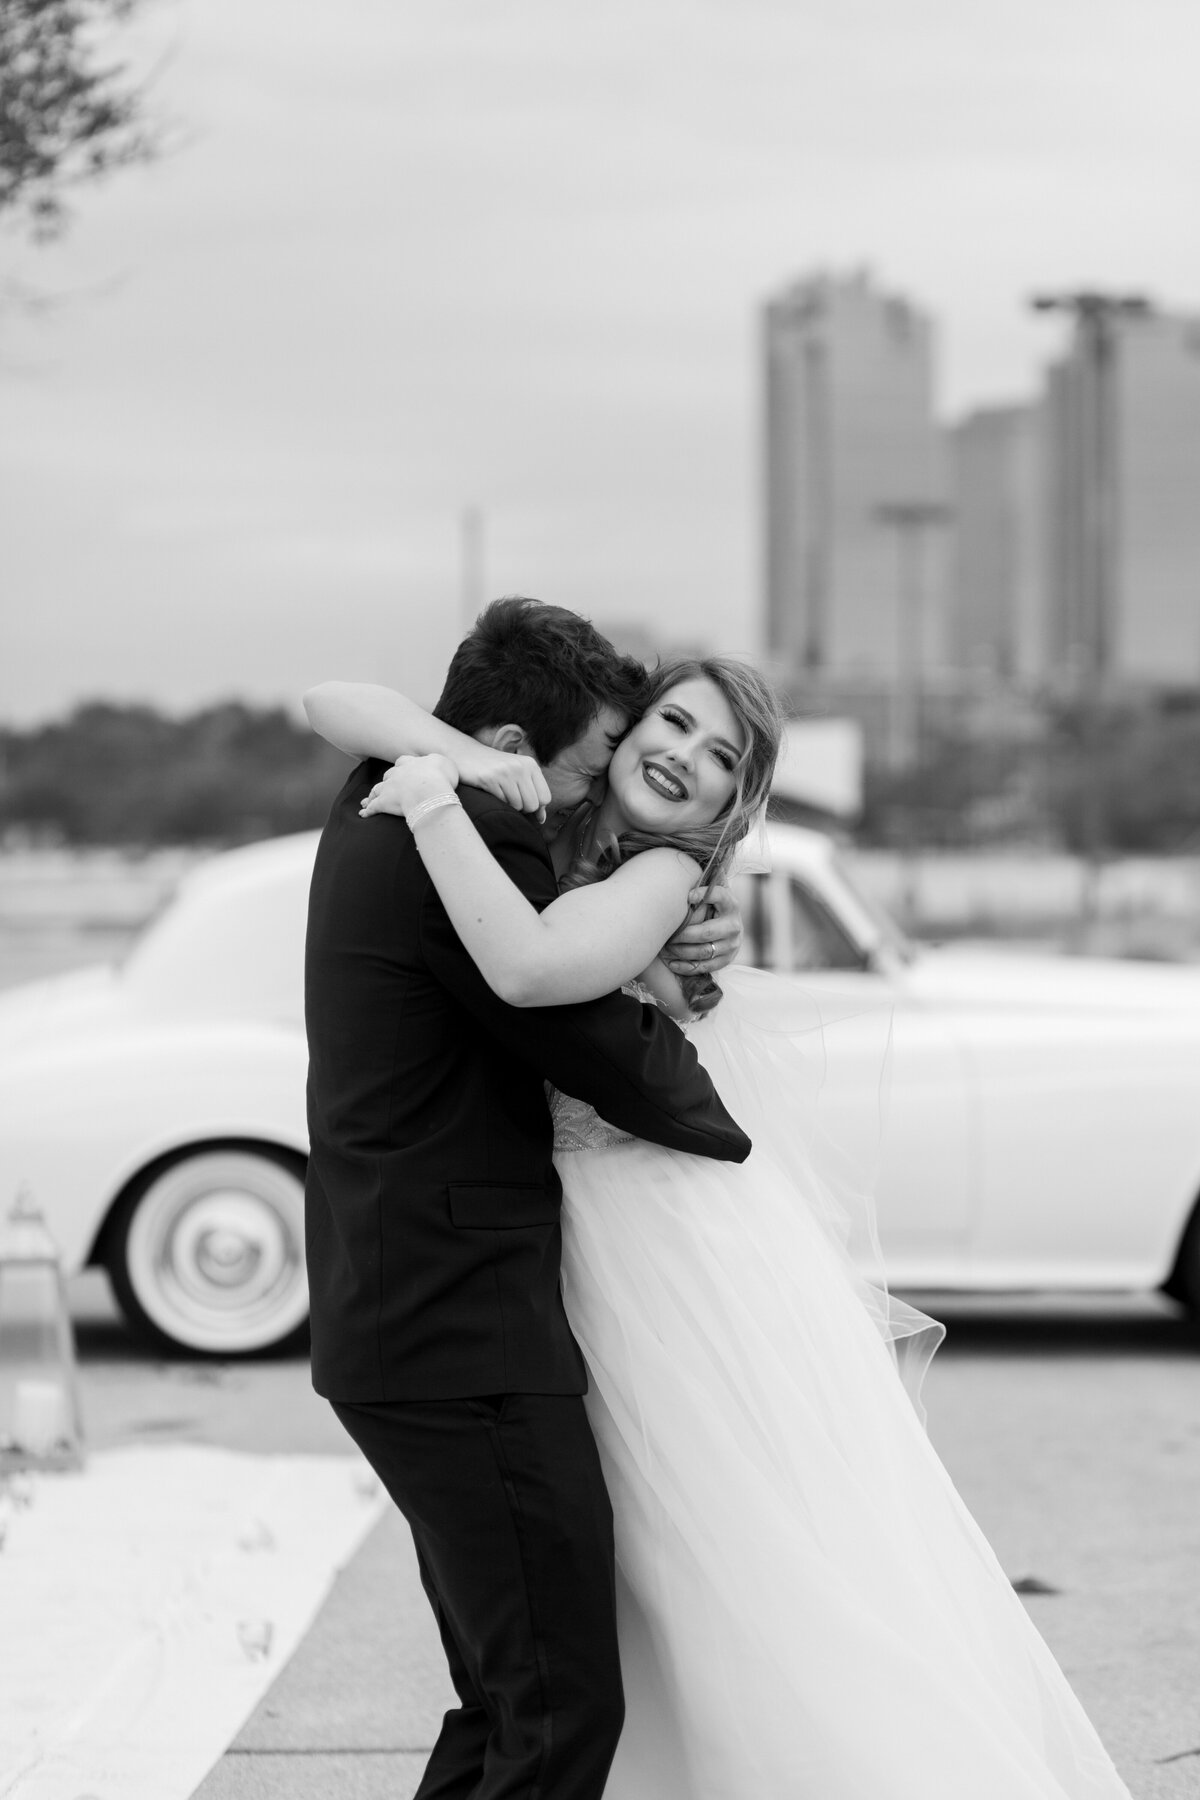 A black and white candid photo of a groom deeply embracing his bride after their elopement in Fort Worth, Texas. The groom is on the left and is wearing a black suit and has his face buried into the bride's neck. The bride is wearing a flowing, white dress, and is looking towards the camera with a large smile on her face. An antique car is behind them with the Fort Worth skyline framing the scene.